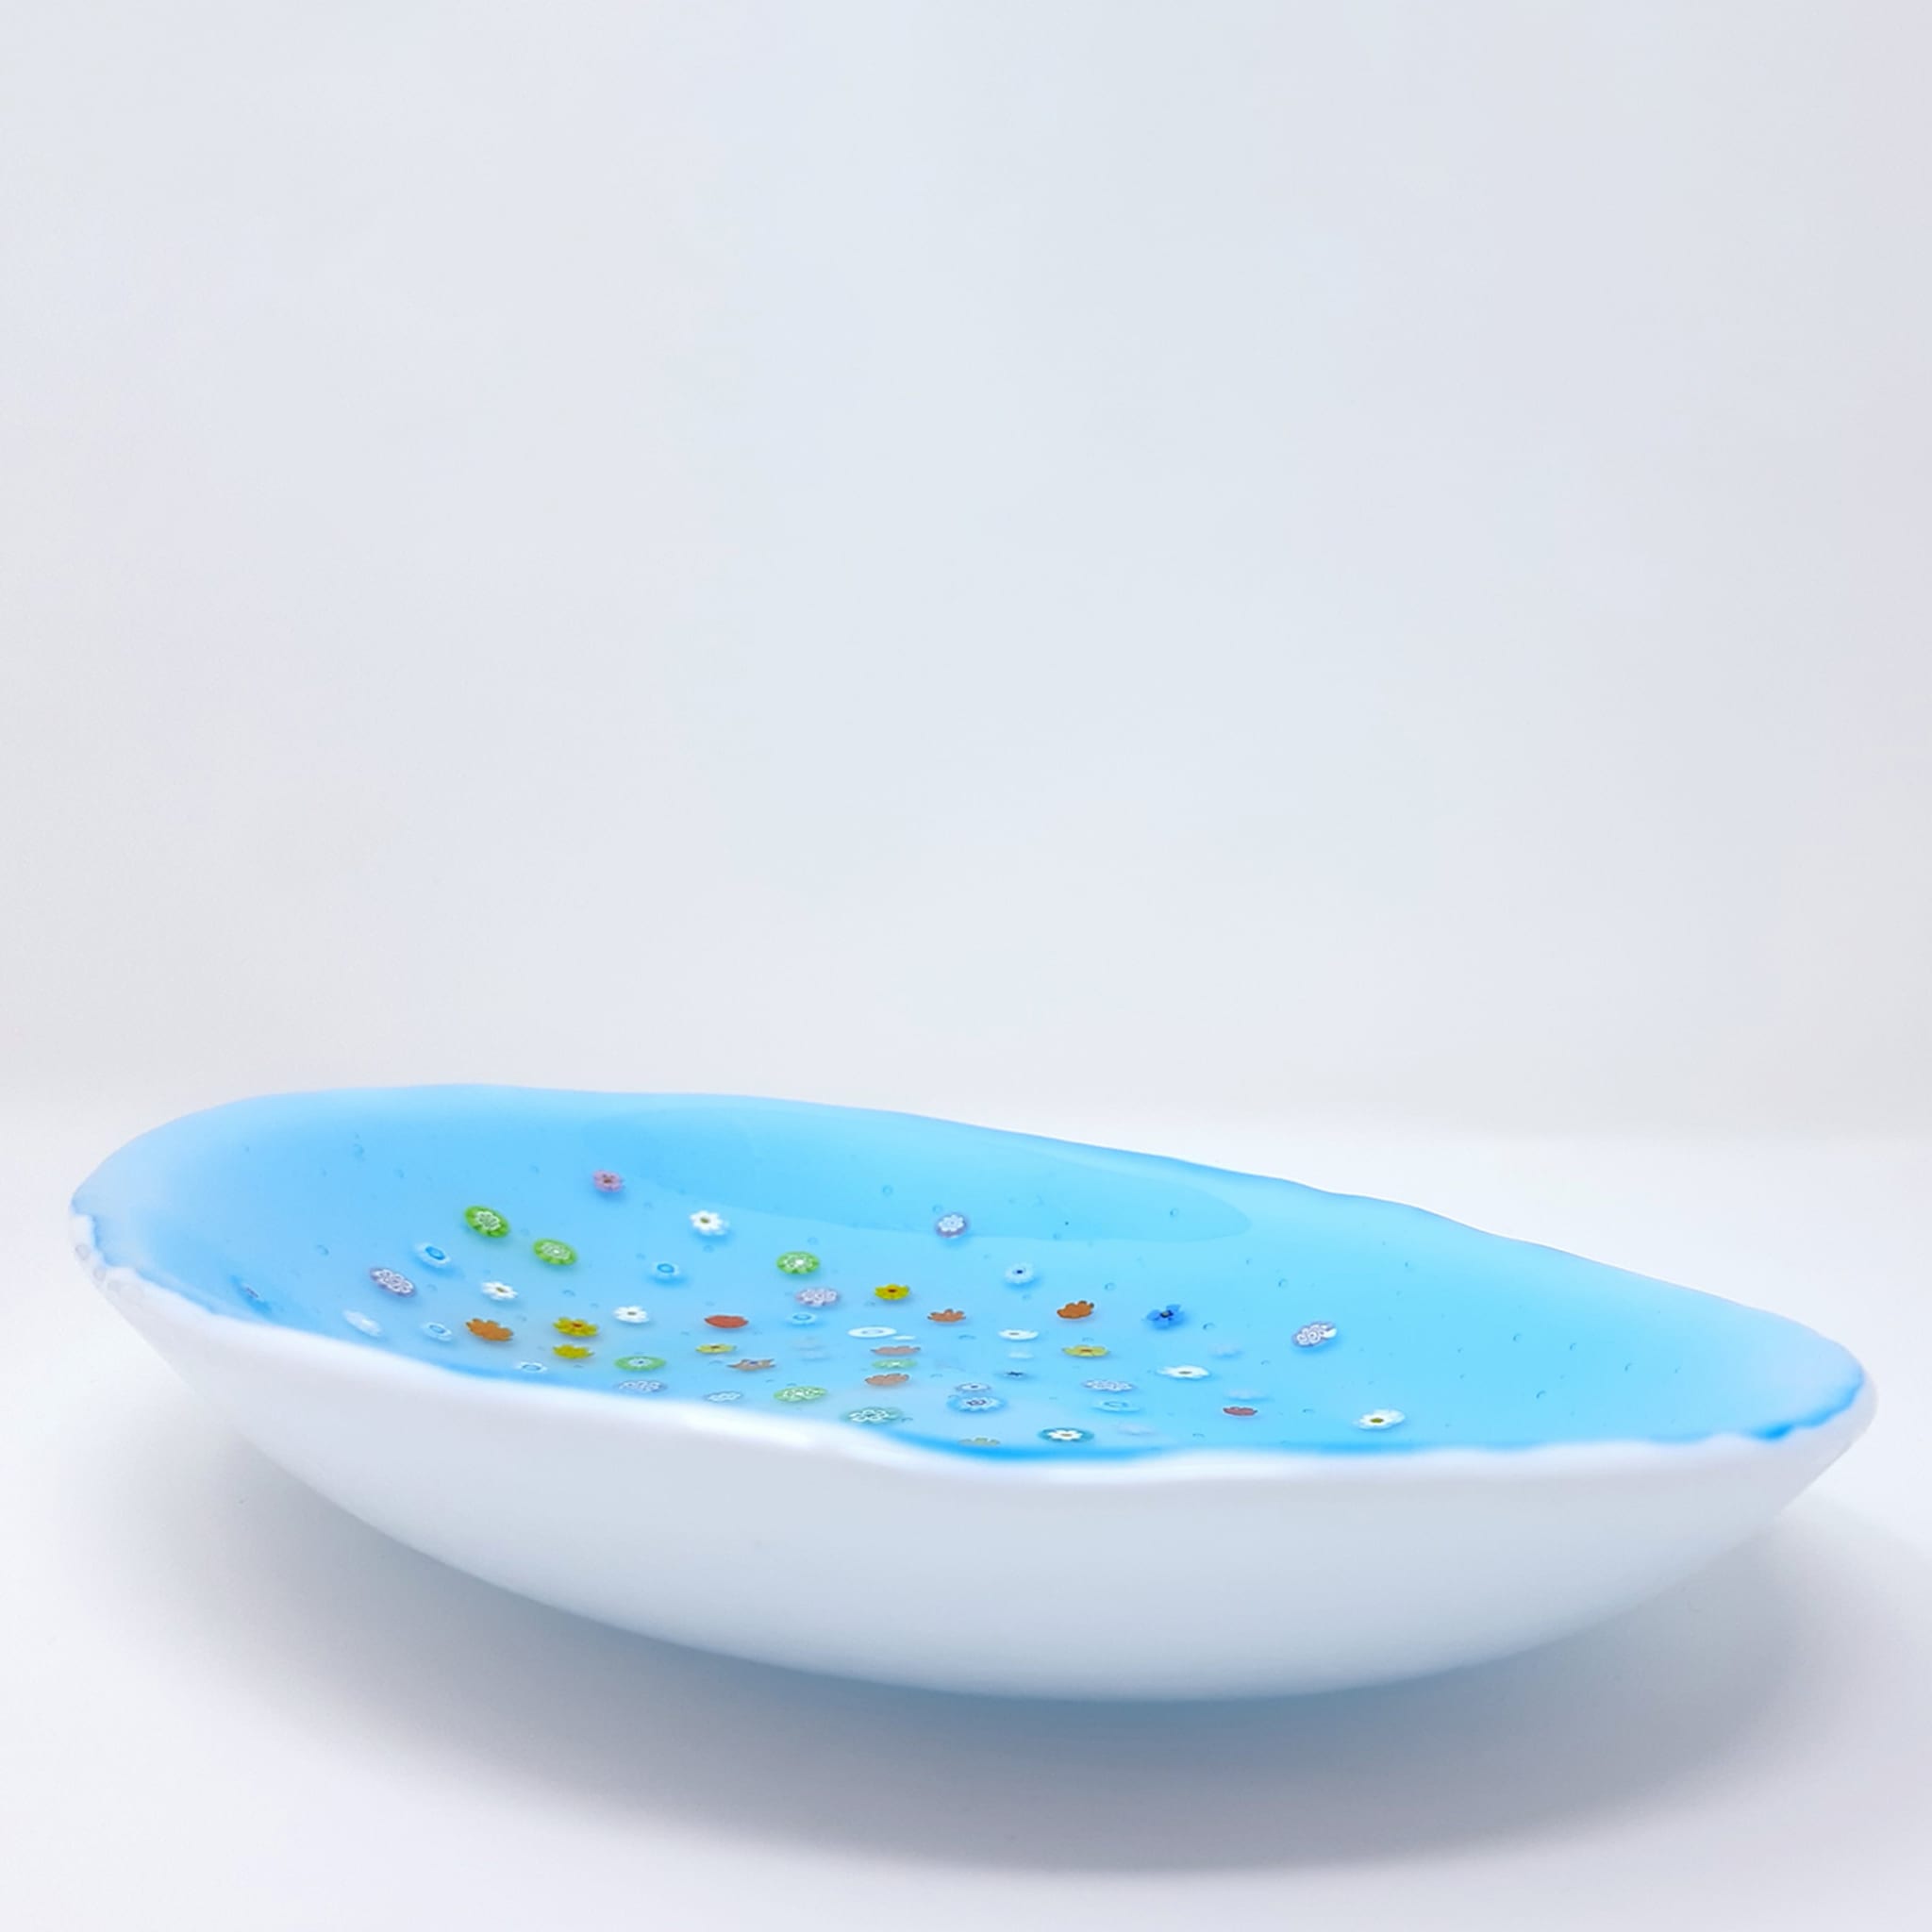 Turquoise Glass Serving Platter with Floral Murrini Inlays  - Alternative view 1